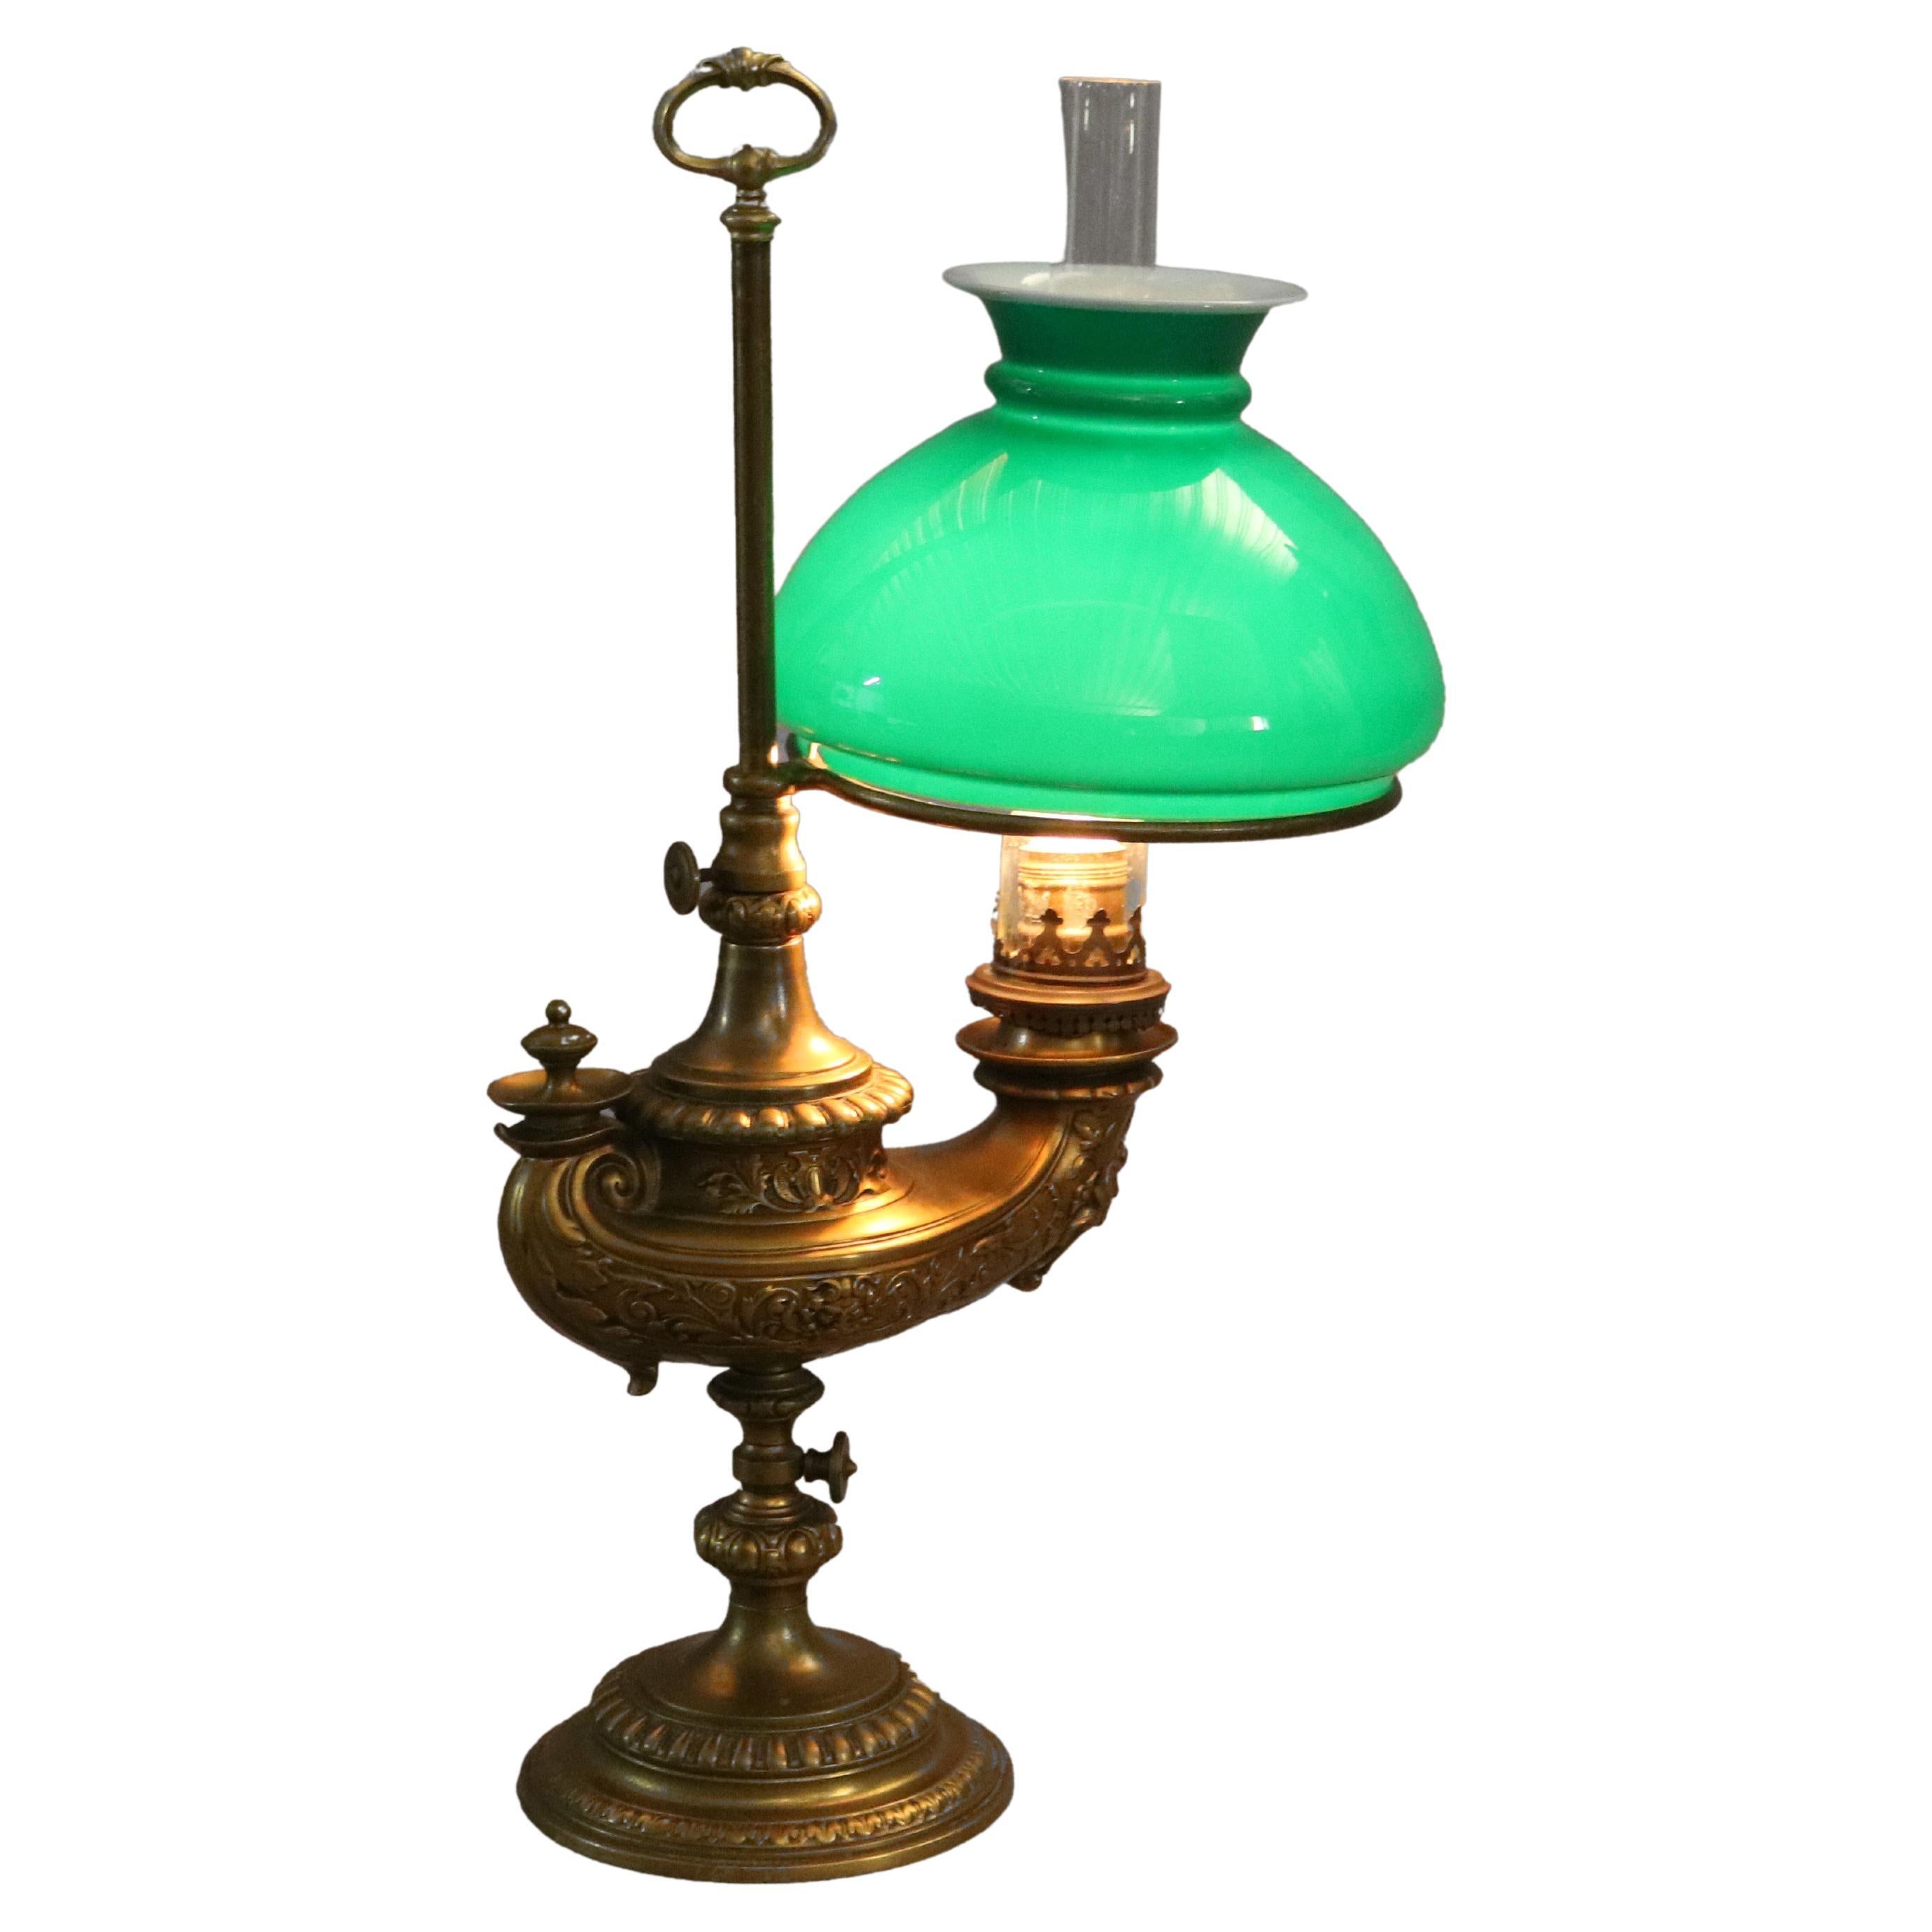 Antique Harvard Student Lamp with Emeralite Shade Alladin Lamp Form 19th Century